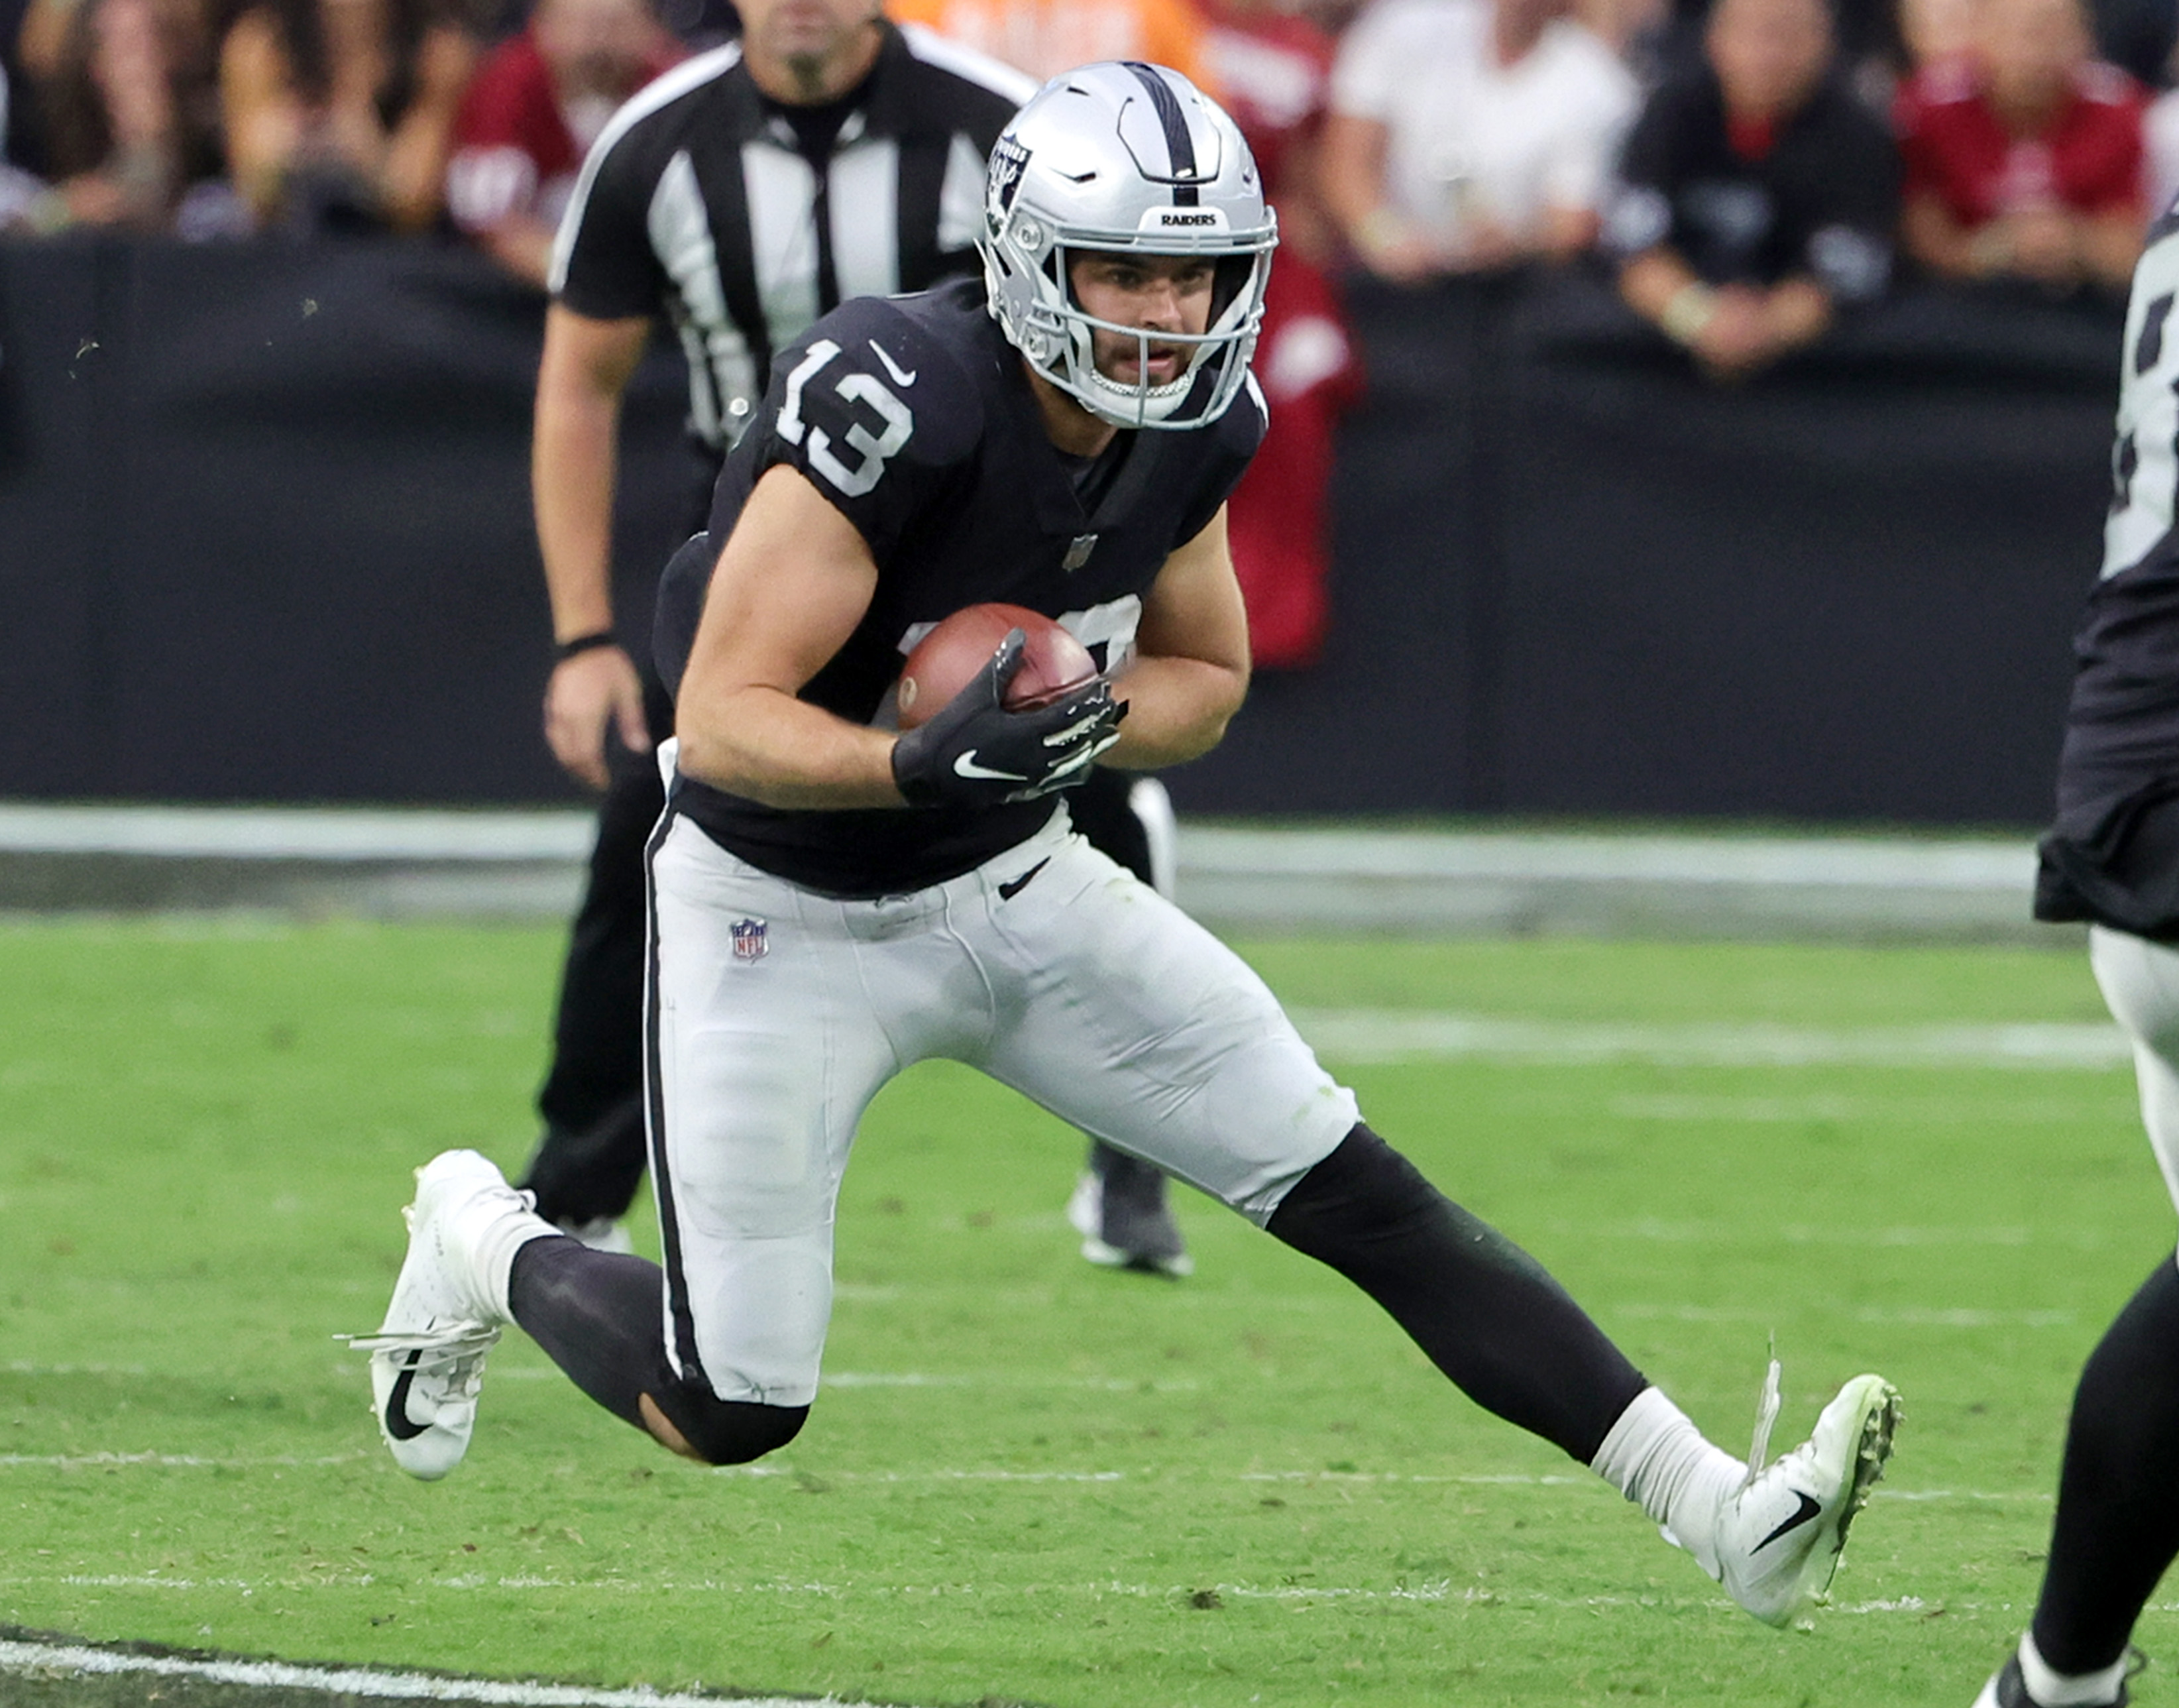 Wide receiver Hunter Renfrow #13 of the Las Vegas Raiders carries the ball after a catch against the Arizona Cardinals in overtime of their game at Allegiant Stadium on September 18, 2022 in Las Vegas, Nevada. The Cardinals defeated the Raiders 29-23 in overtime.